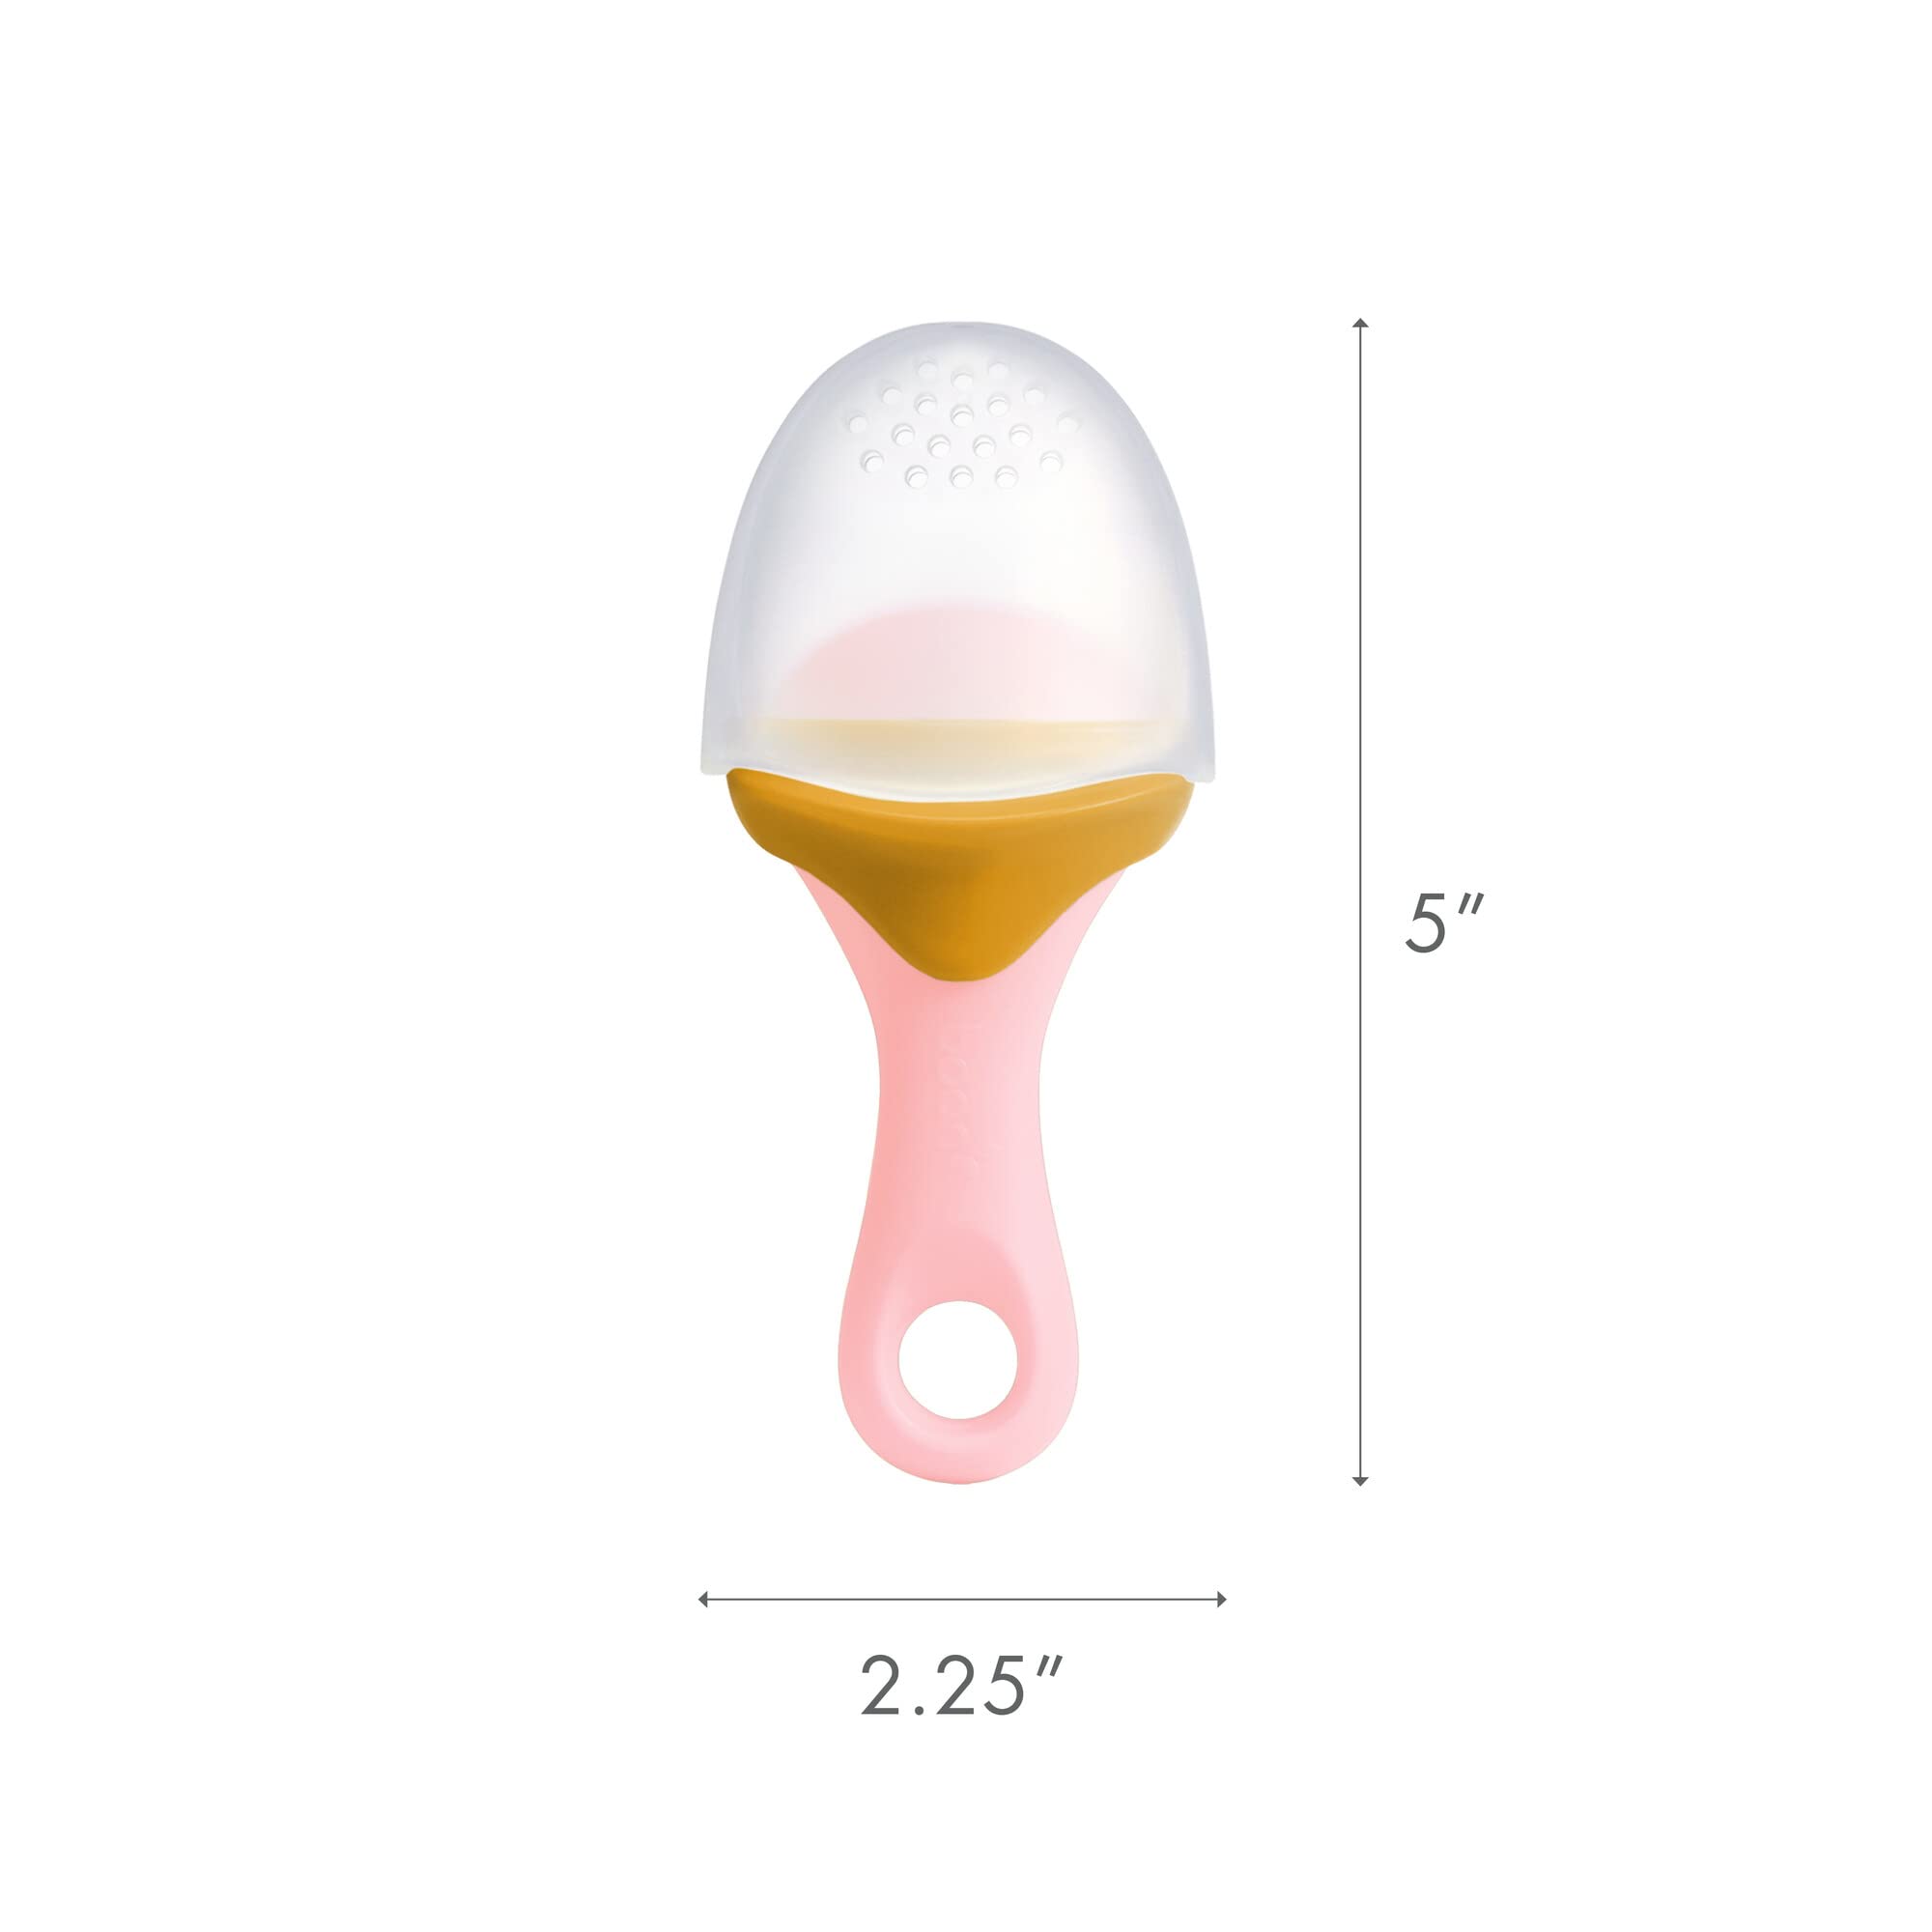 Boon PULP Silicone Baby Feeder — 2 Count — Orange/Pink and White/Mauve — Soft Silicone Vegetable and Fruit Feeders — Teething Baby Essentials